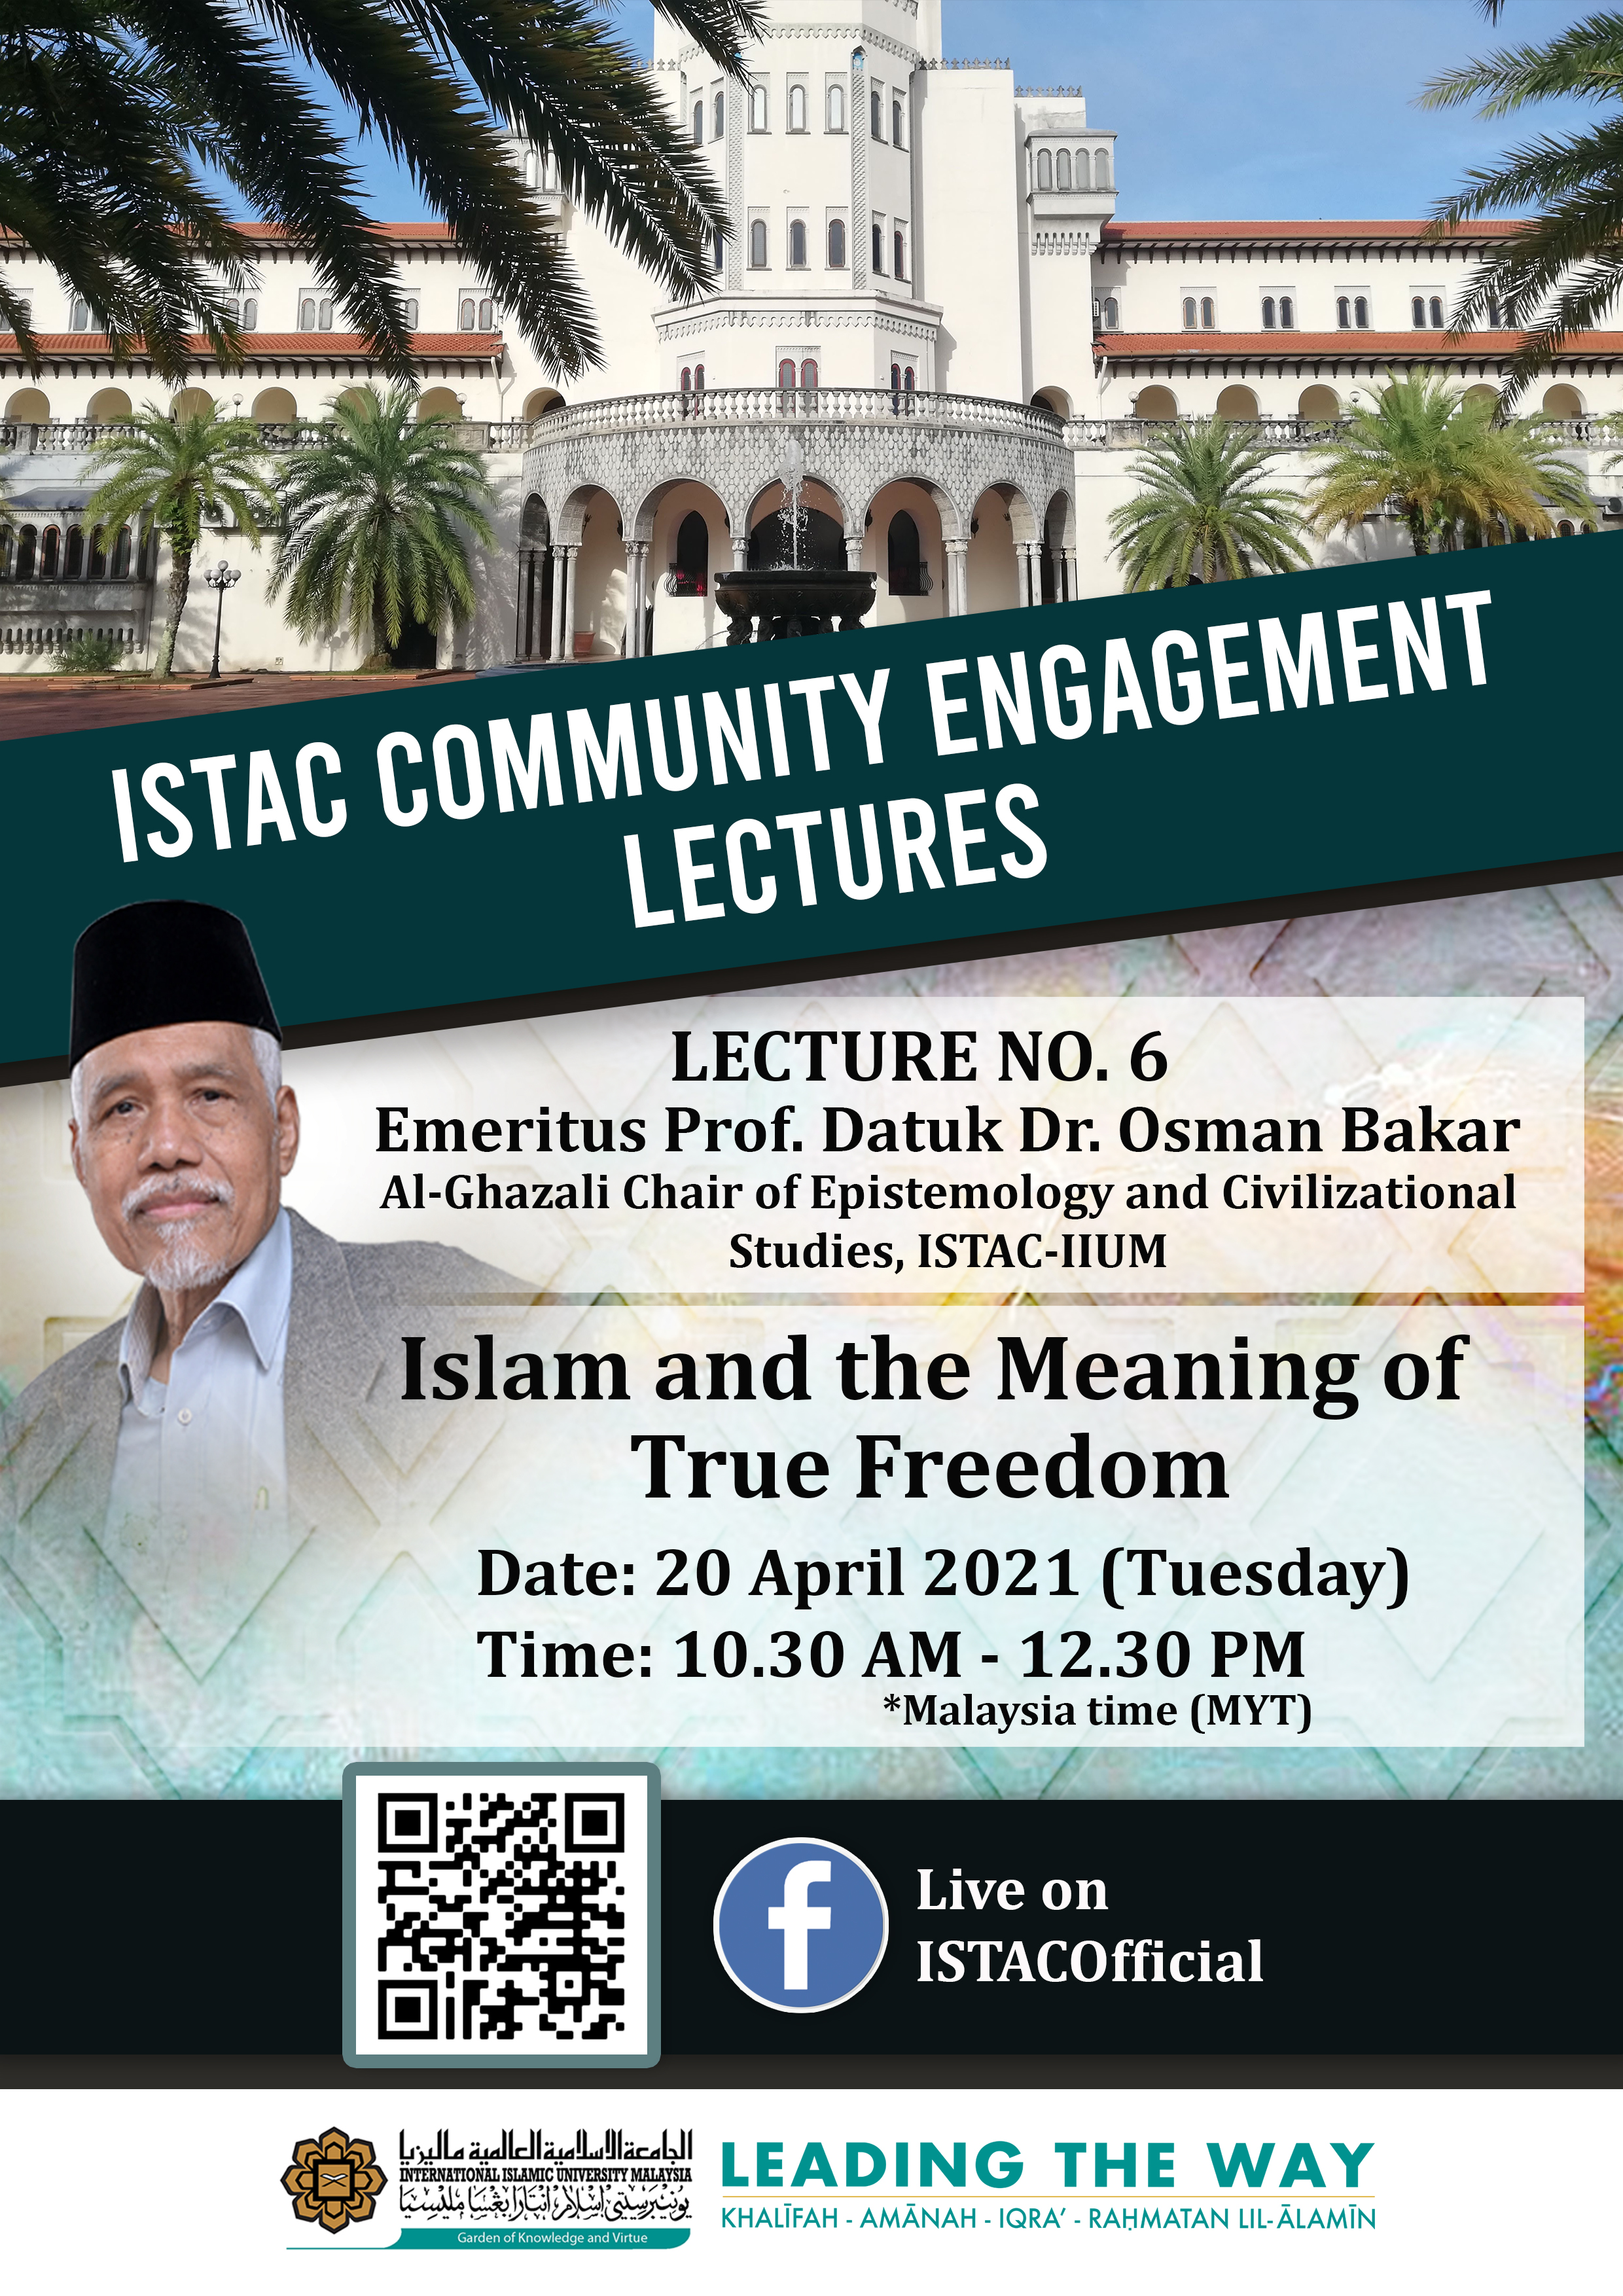 ISTAC COMMUNITY ENGAGEMENT LECTURES